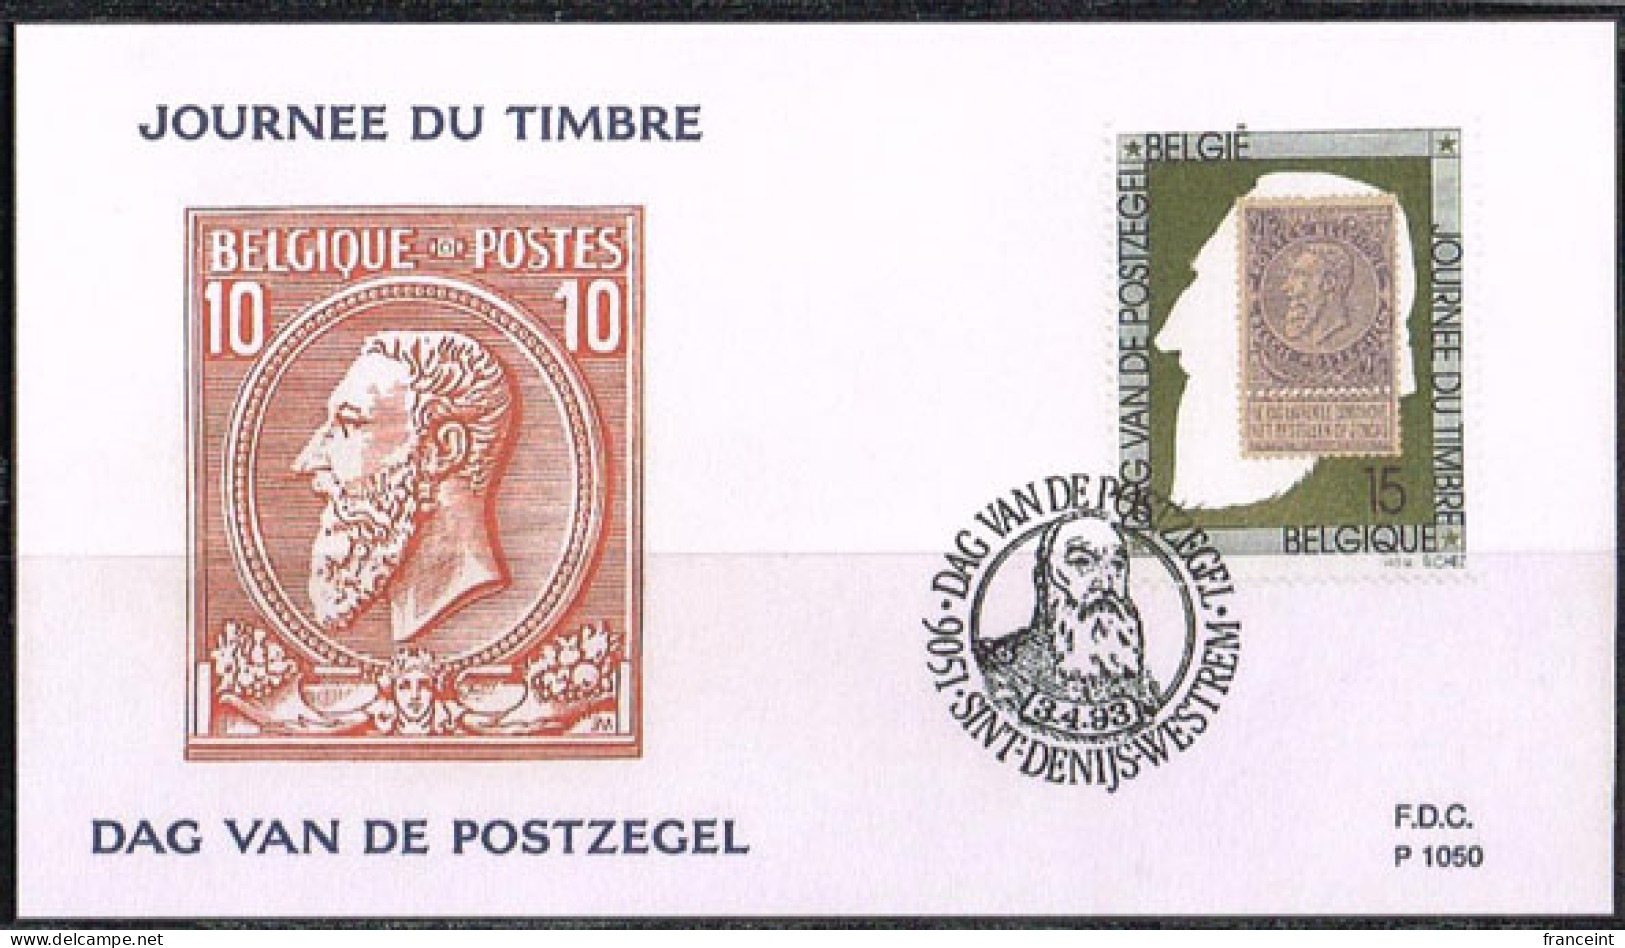 BELGIUM(1993) Old Leopold Stamp. Die Proof In Black Signed By The Engraver, Representing The FDC Cachet. Scott 1582 - Proeven & Herdruk